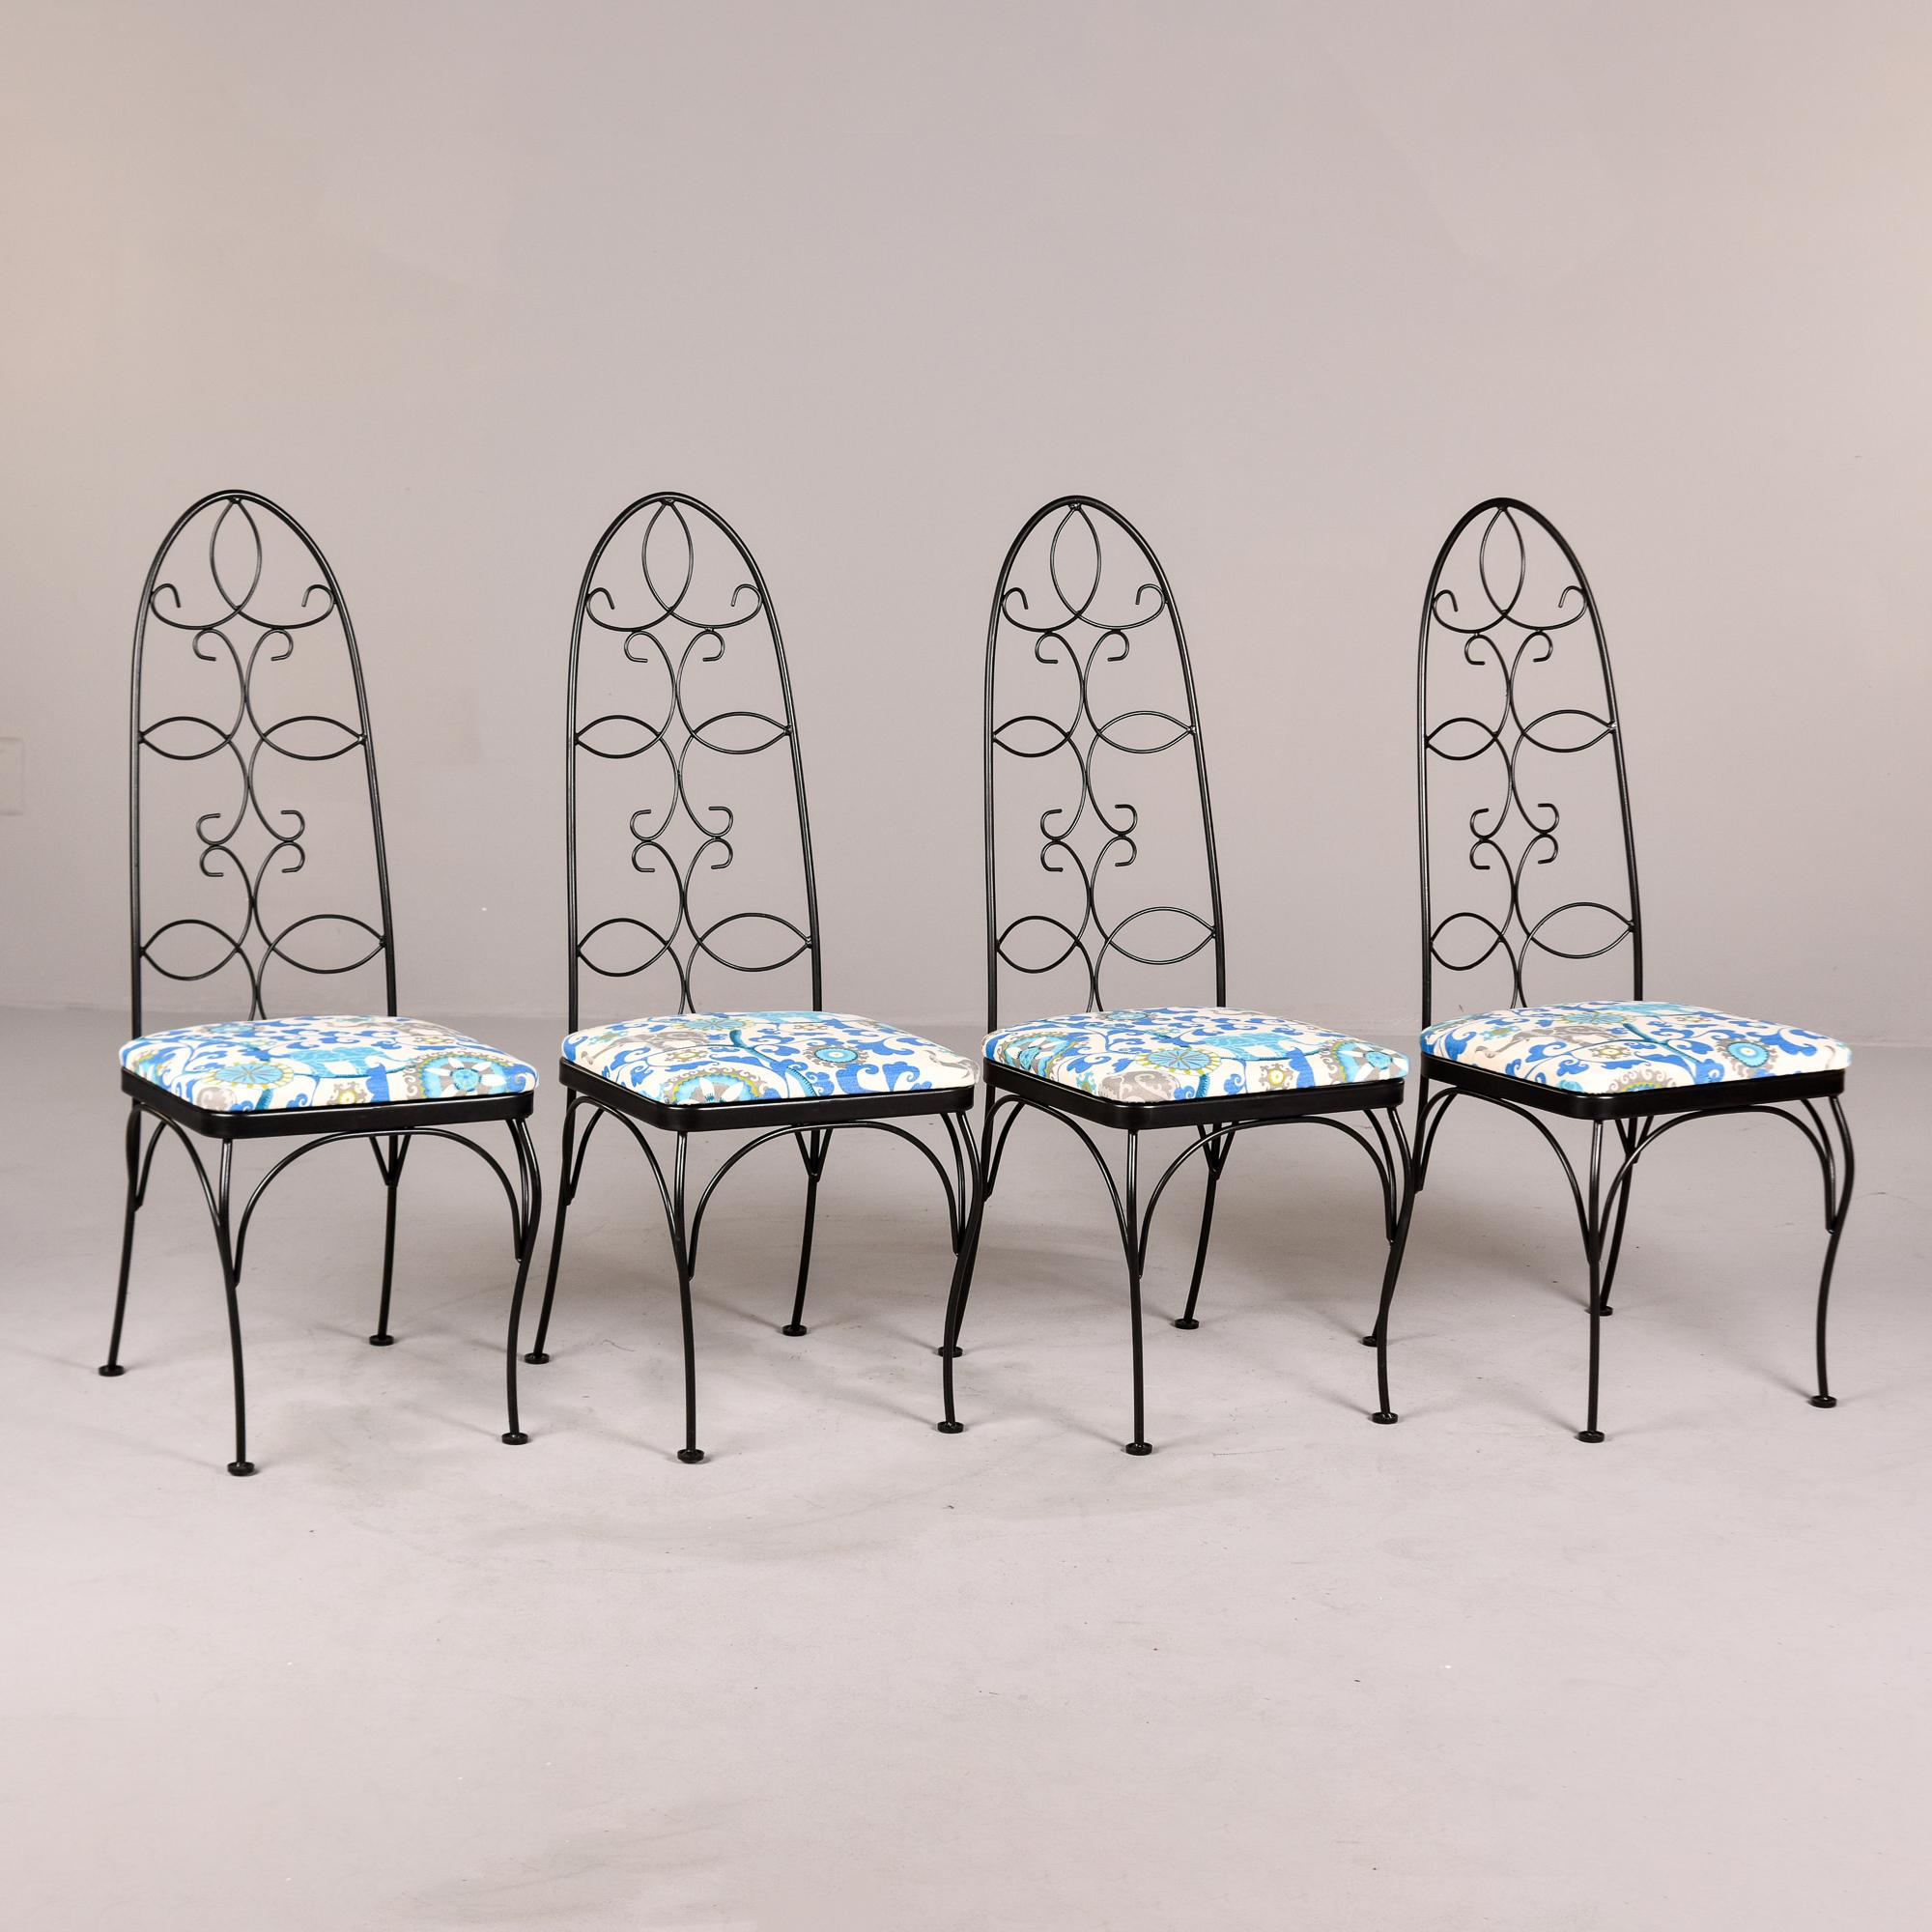 Set of four mid century patio chairs featuring scrolled wrought iron, high back frames painted in black. Newly upholstered seats in a fun, colorful outdoor fabric. Faint maker’s mark of Lloyd found on underside of one chair frame. We estimate these